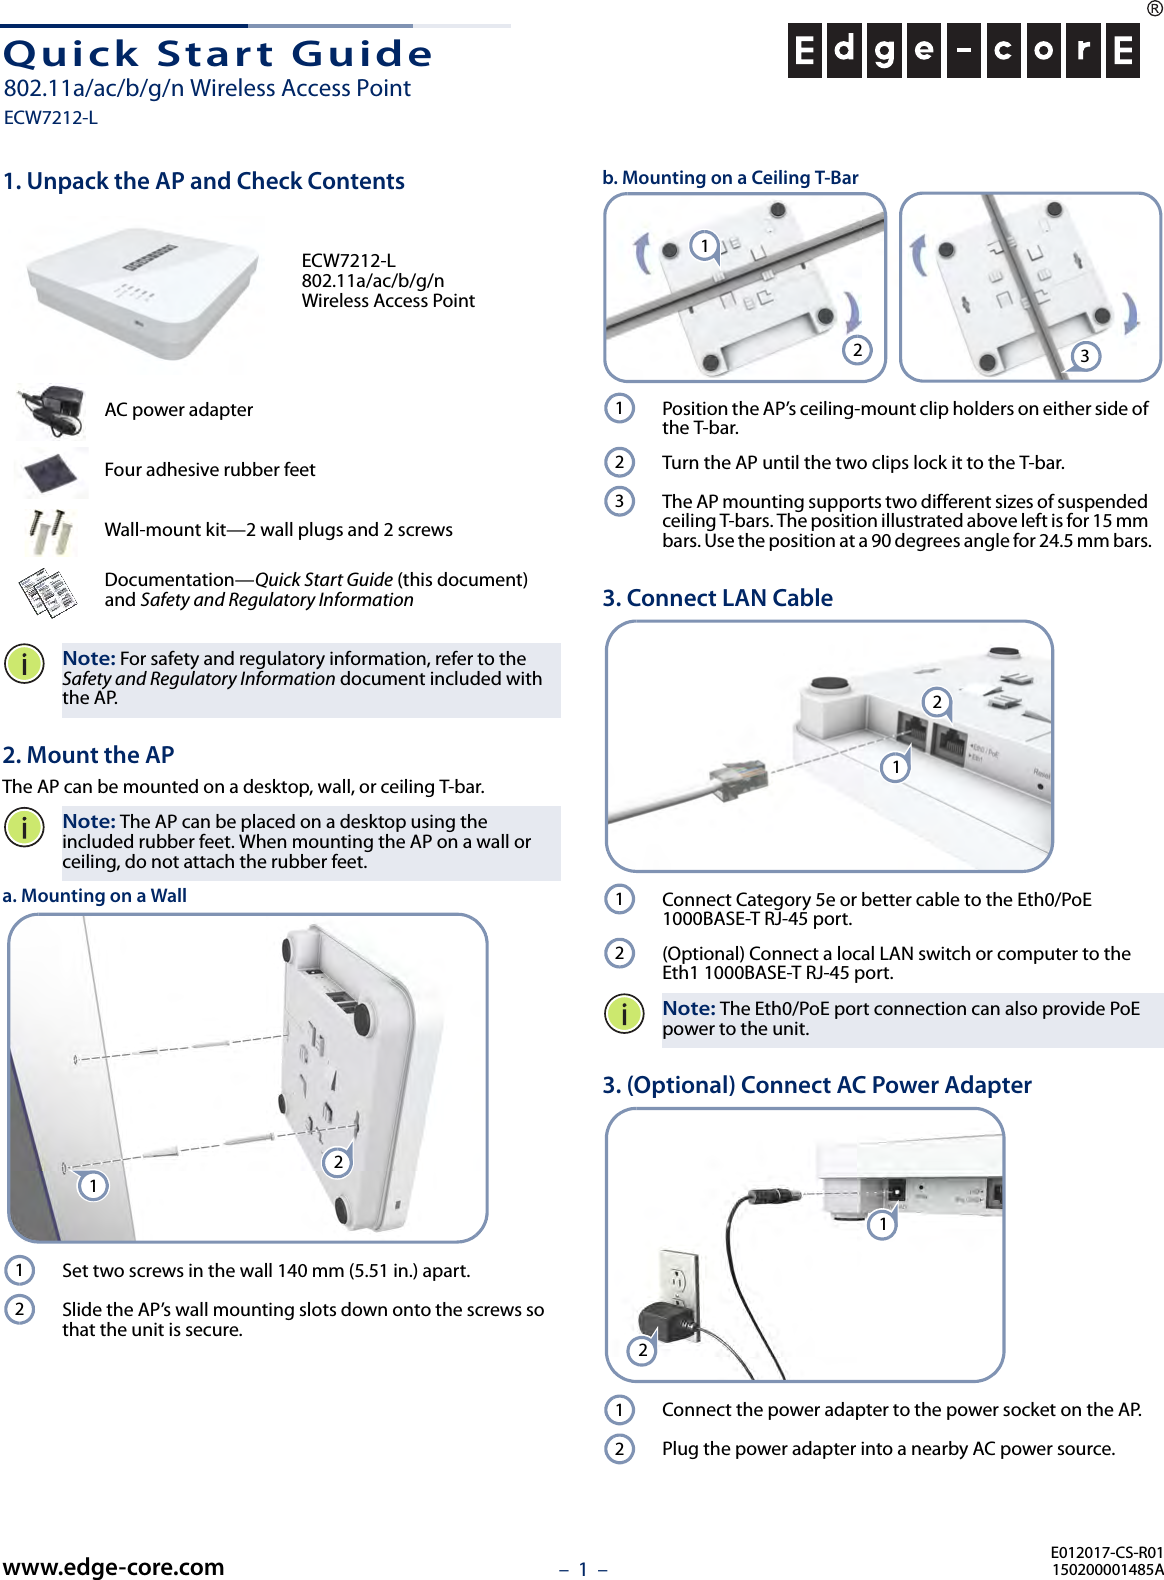 – 1  –Quick Start Guide1. Unpack the AP and Check ContentsECW7212-L 802.11a/ac/b/g/n Wireless Access PointAC power adapterFour adhesive rubber feetWall-mount kit—2 wall plugs and 2 screwsDocumentation—Quick Start Guide (this document) and Safety and Regulatory InformationNote: For safety and regulatory information, refer to the Safety and Regulatory Information document included with the AP.2. Mount the APThe AP can be mounted on a desktop, wall, or ceiling T-bar.Note: The AP can be placed on a desktop using the included rubber feet. When mounting the AP on a wall or ceiling, do not attach the rubber feet.a. Mounting on a WallSet two screws in the wall 140 mm (5.51 in.) apart.Slide the AP’s wall mounting slots down onto the screws so that the unit is secure.1212b. Mounting on a Ceiling T-BarPosition the AP’s ceiling-mount clip holders on either side of the T-bar.Turn the AP until the two clips lock it to the T-bar.The AP mounting supports two different sizes of suspended ceiling T-bars. The position illustrated above left is for 15 mm bars. Use the position at a 90 degrees angle for 24.5 mm bars.3. Connect LAN CableConnect Category 5e or better cable to the Eth0/PoE 1000BASE-T RJ-45 port.(Optional) Connect a local LAN switch or computer to the Eth1 1000BASE-T RJ-45 port.Note: The Eth0/PoE port connection can also provide PoE power to the unit.3. (Optional) Connect AC Power AdapterConnect the power adapter to the power socket on the AP. Plug the power adapter into a nearby AC power source.21312312121212E012017-CS-R01150200001485Awww.edge-core.com802.11a/ac/b/g/n Wireless Access PointECW7212-L